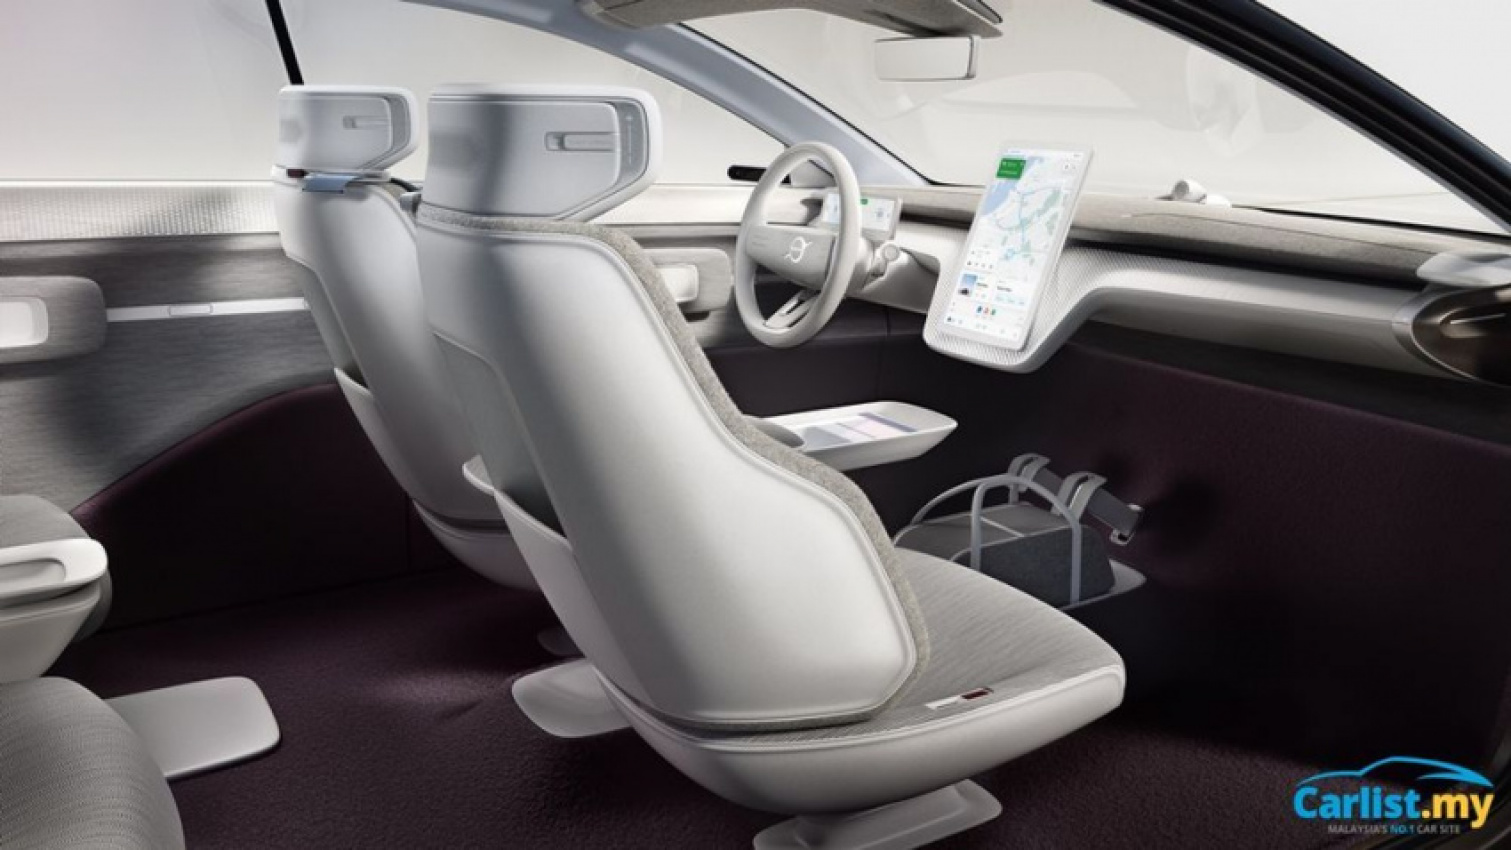 autos, cars, google, volvo, android, auto news, ev, volvo cars tech moment, volvo concept, volvo concept recharge, volvo electric, volvo plans 2030, android, future volvos will run on an in-house operating system developed with google